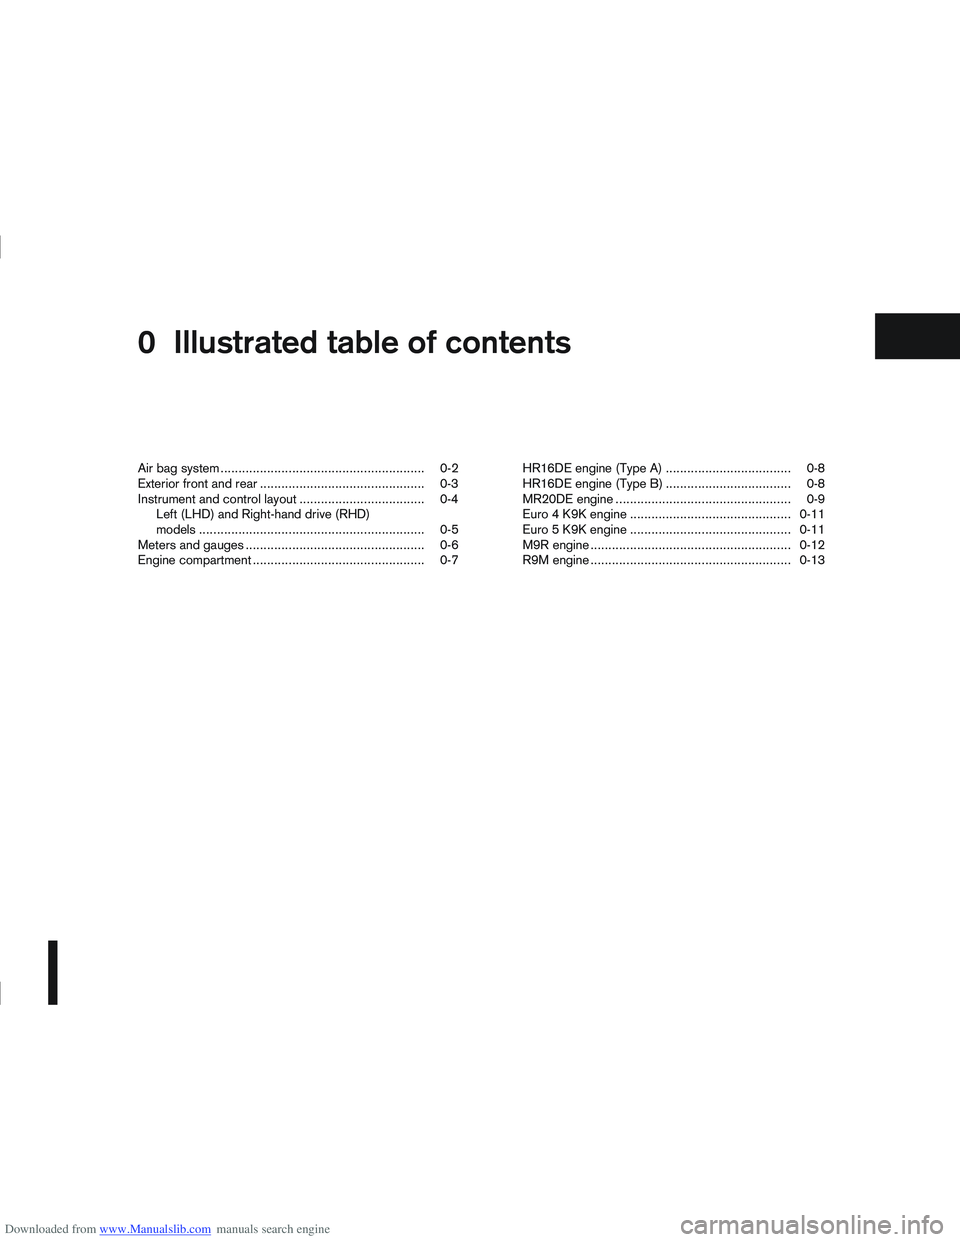 NISSAN QASHQAI 2006  Owners Manual Downloaded from www.Manualslib.com manuals search engine 0Illustrated table of contents
Illustrated table of contents
Air bag system ......................................................... 0-2
Exter